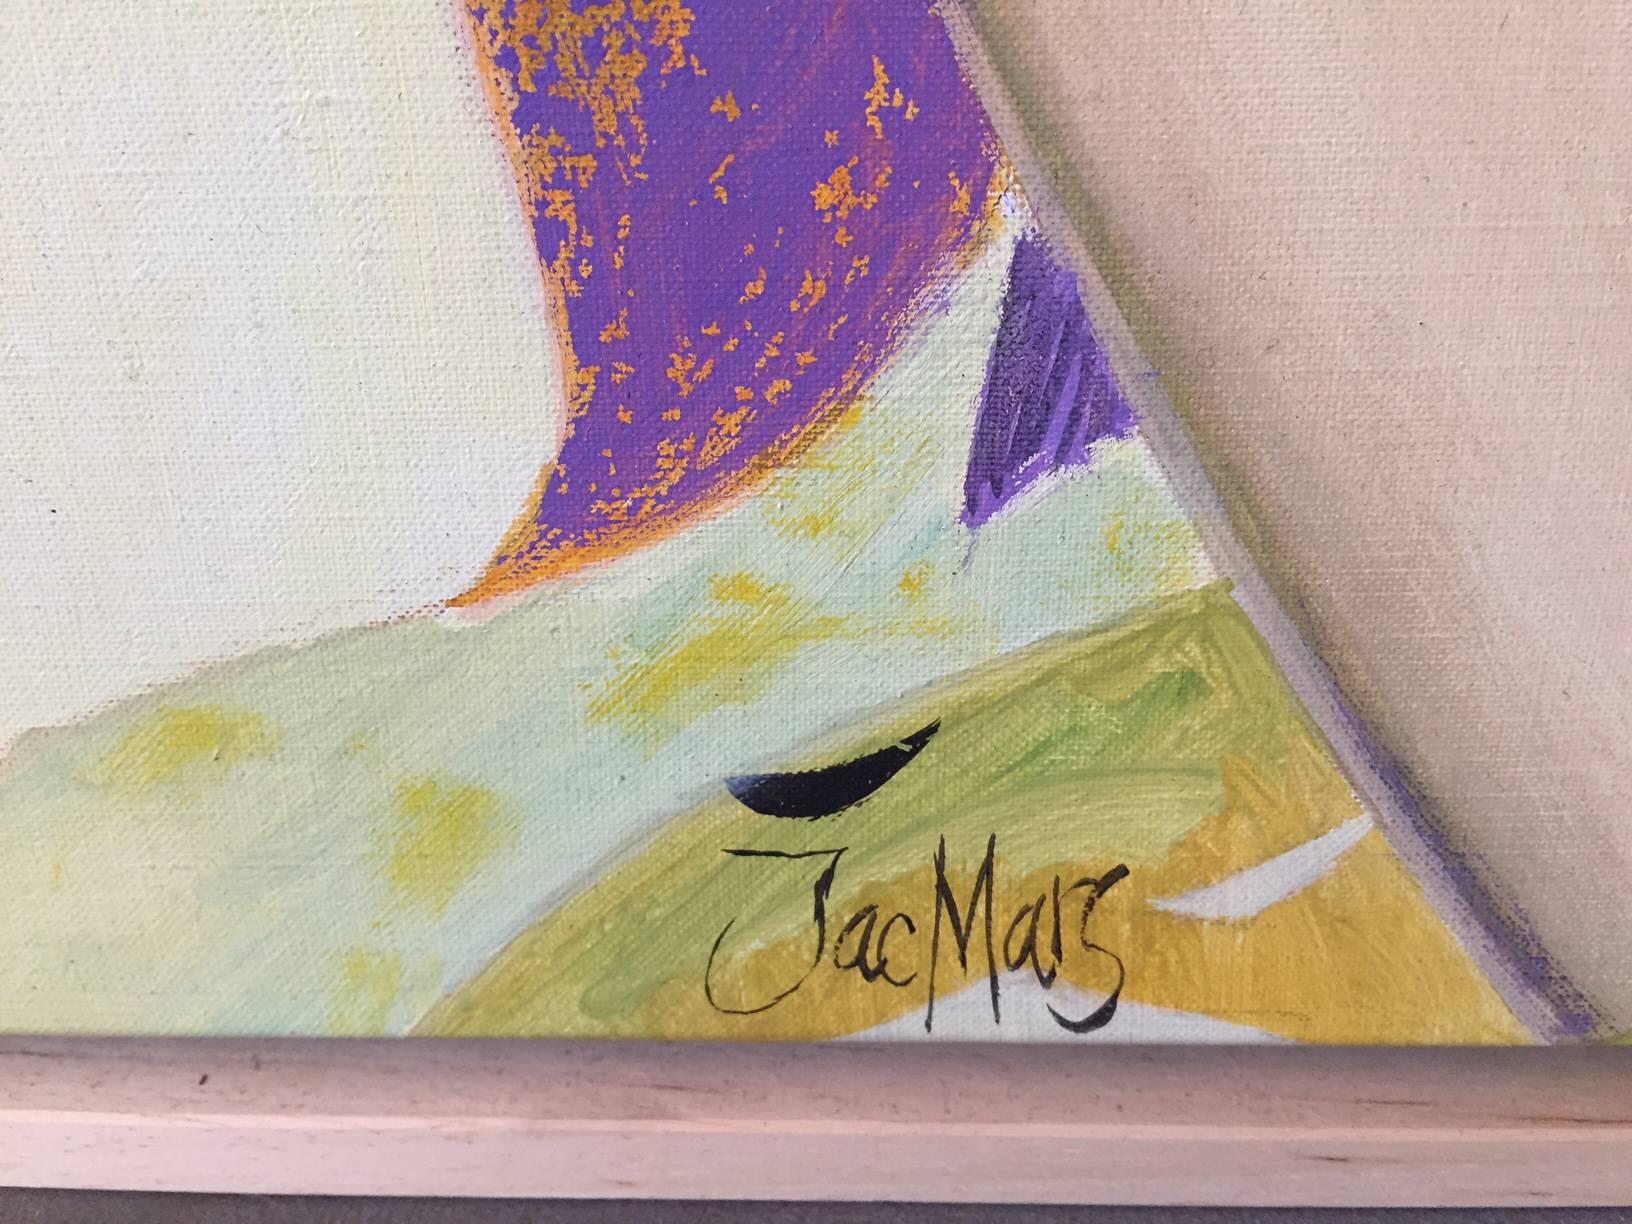 Late 20th Century Troels Marstrand or Mars, Oil on Canvas, Signed, Danish, circa 1970 For Sale